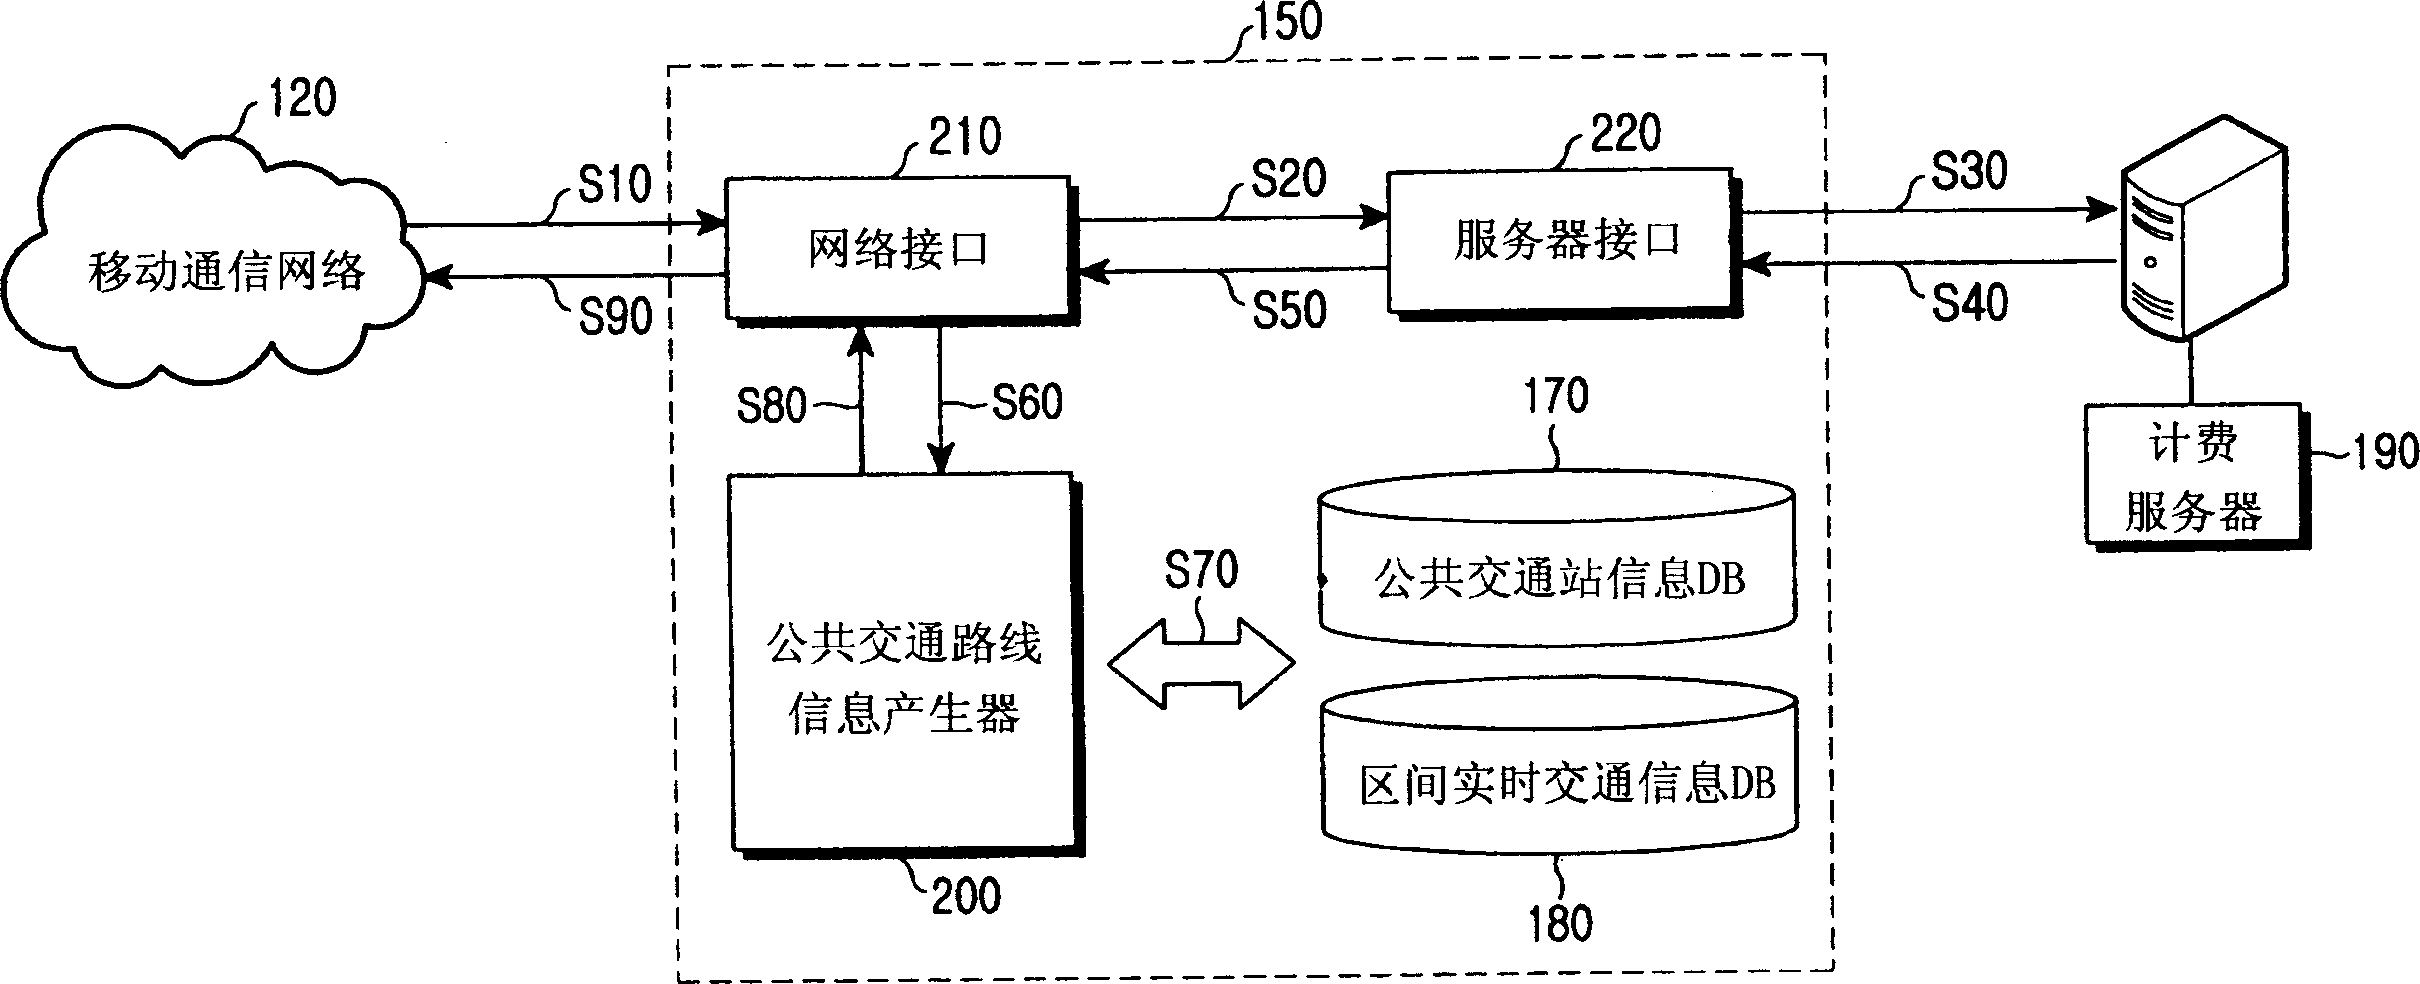 System and method for providing public tranport information